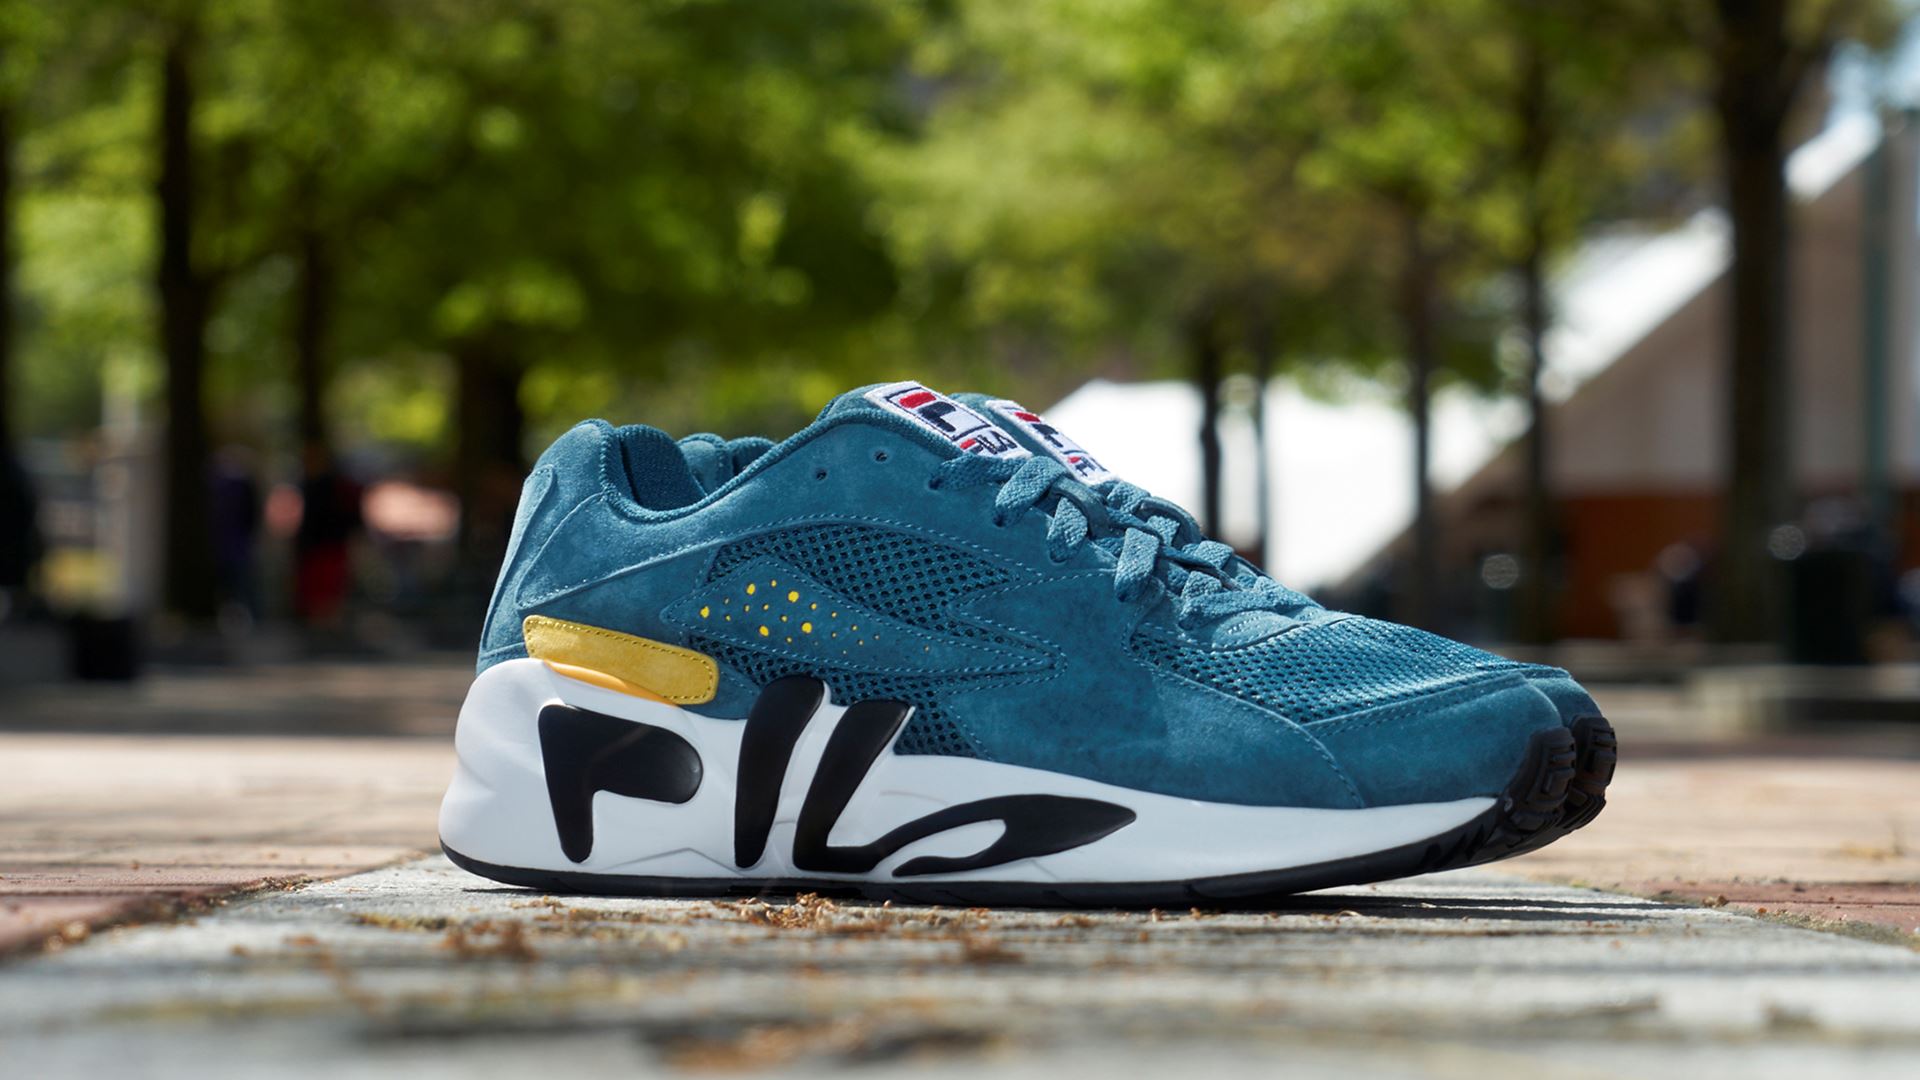 FILA Launches New Mindblower Pack Featuring Two Seasonal Colorways